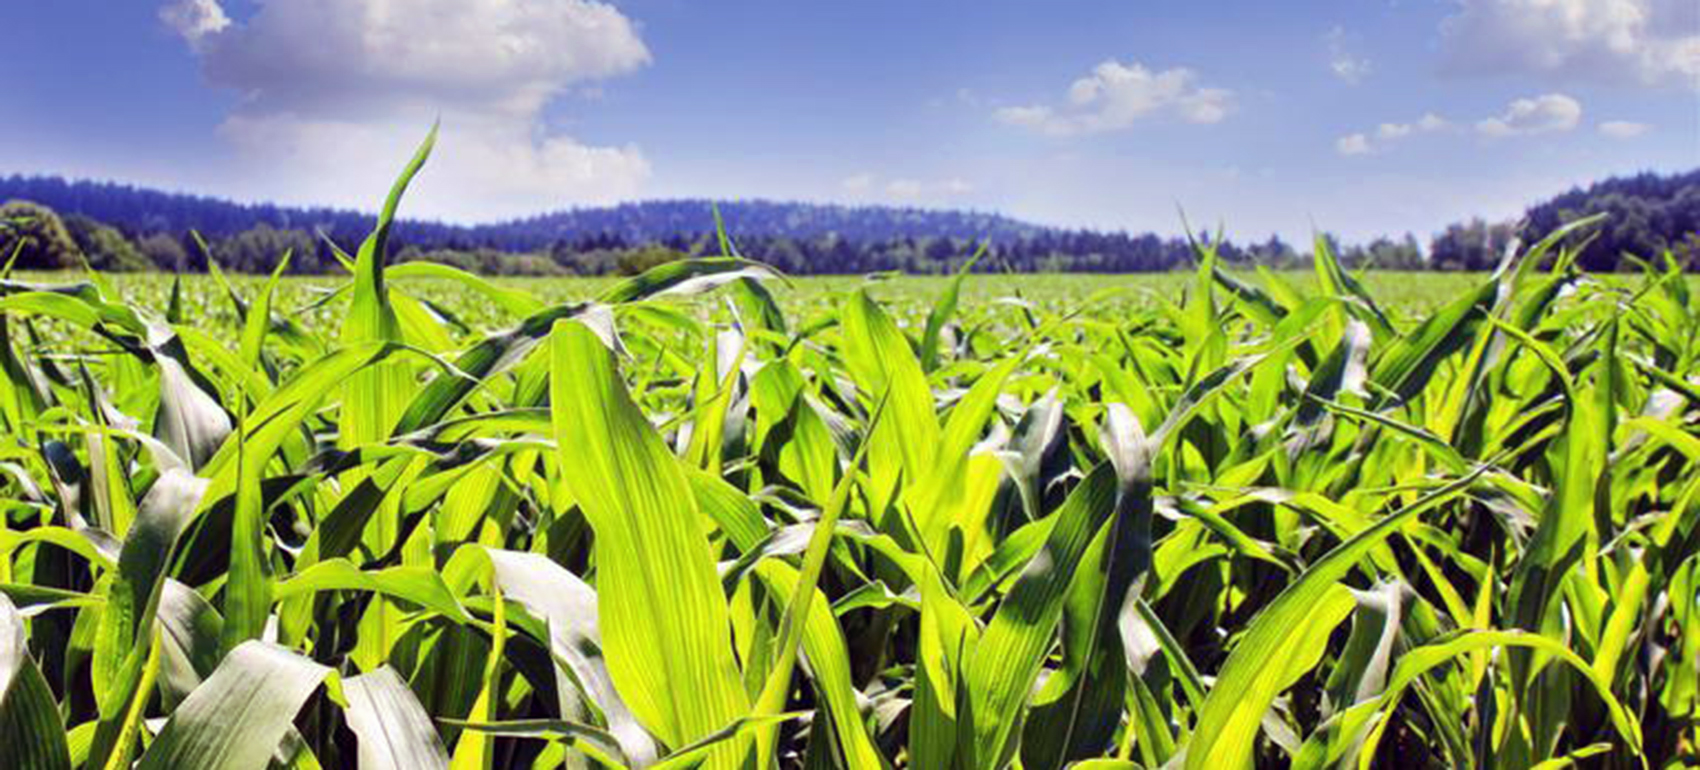 lucious field of corn crop